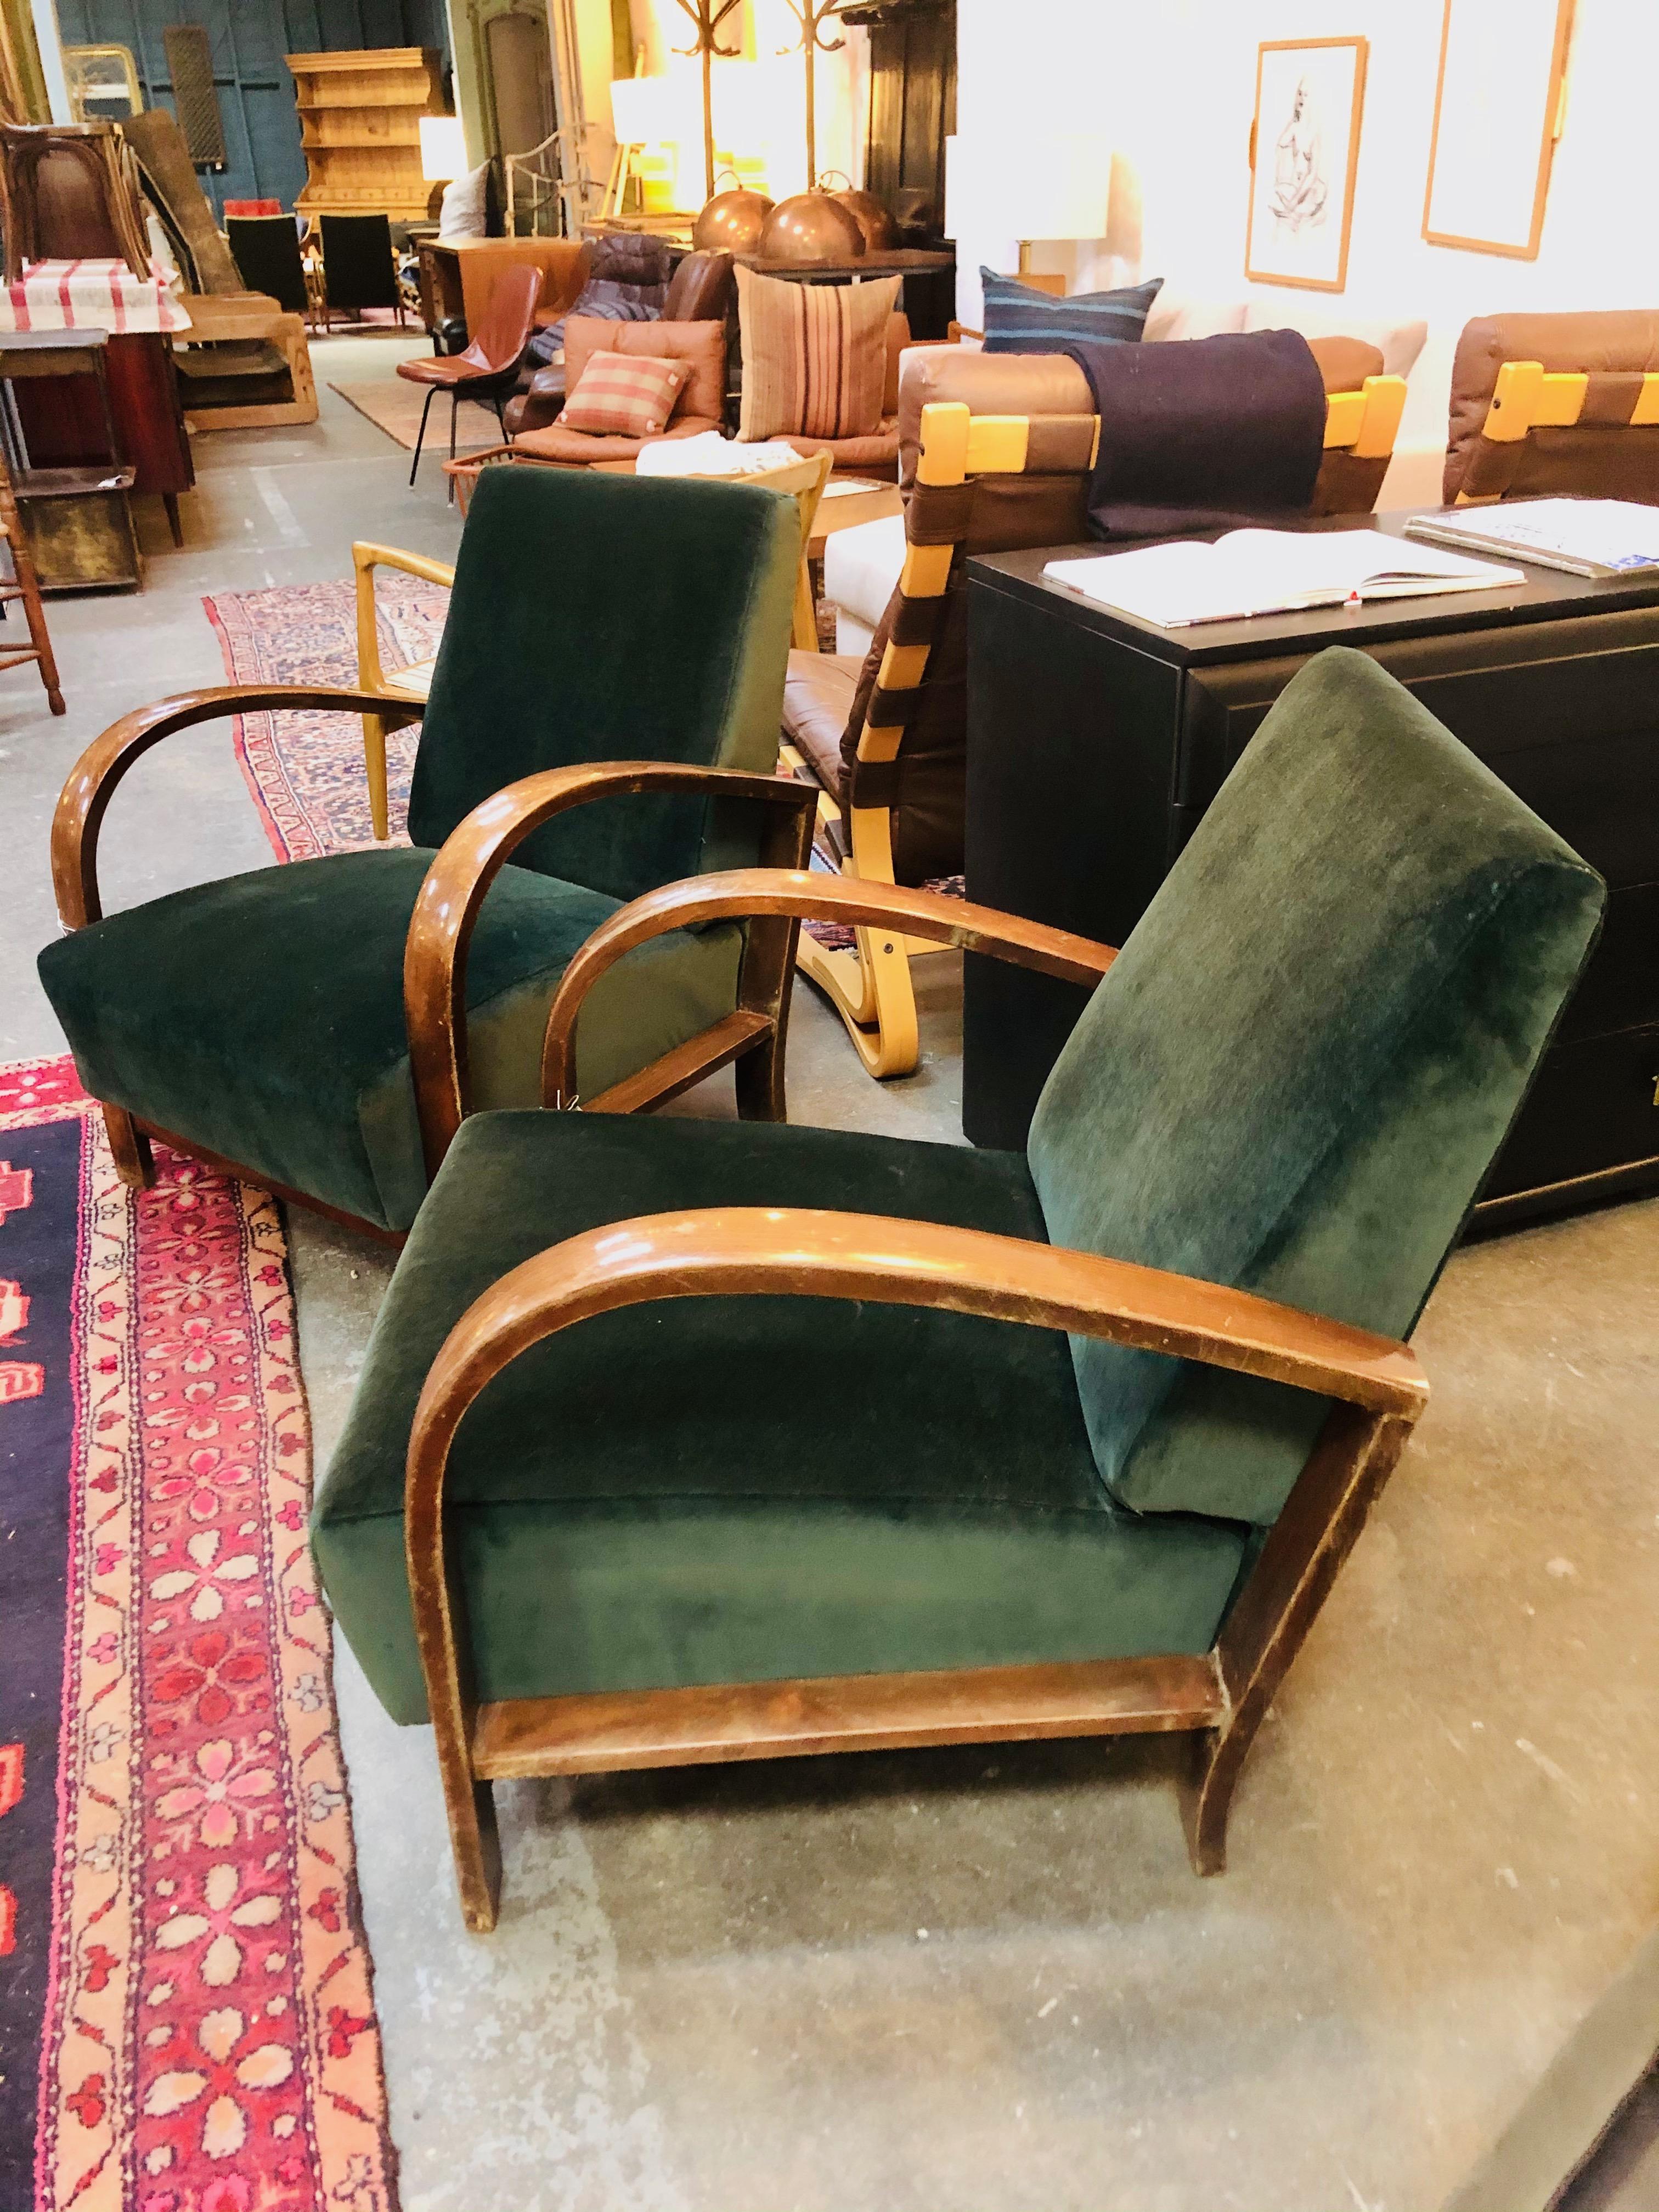 Art Deco reupholstered velvet armchairs would be perfect as an occasional chair for most living spaces, office or retail spaces. These chairs were reupholstered, but stayed true to the original design as well as keeping the wood frame and finish.